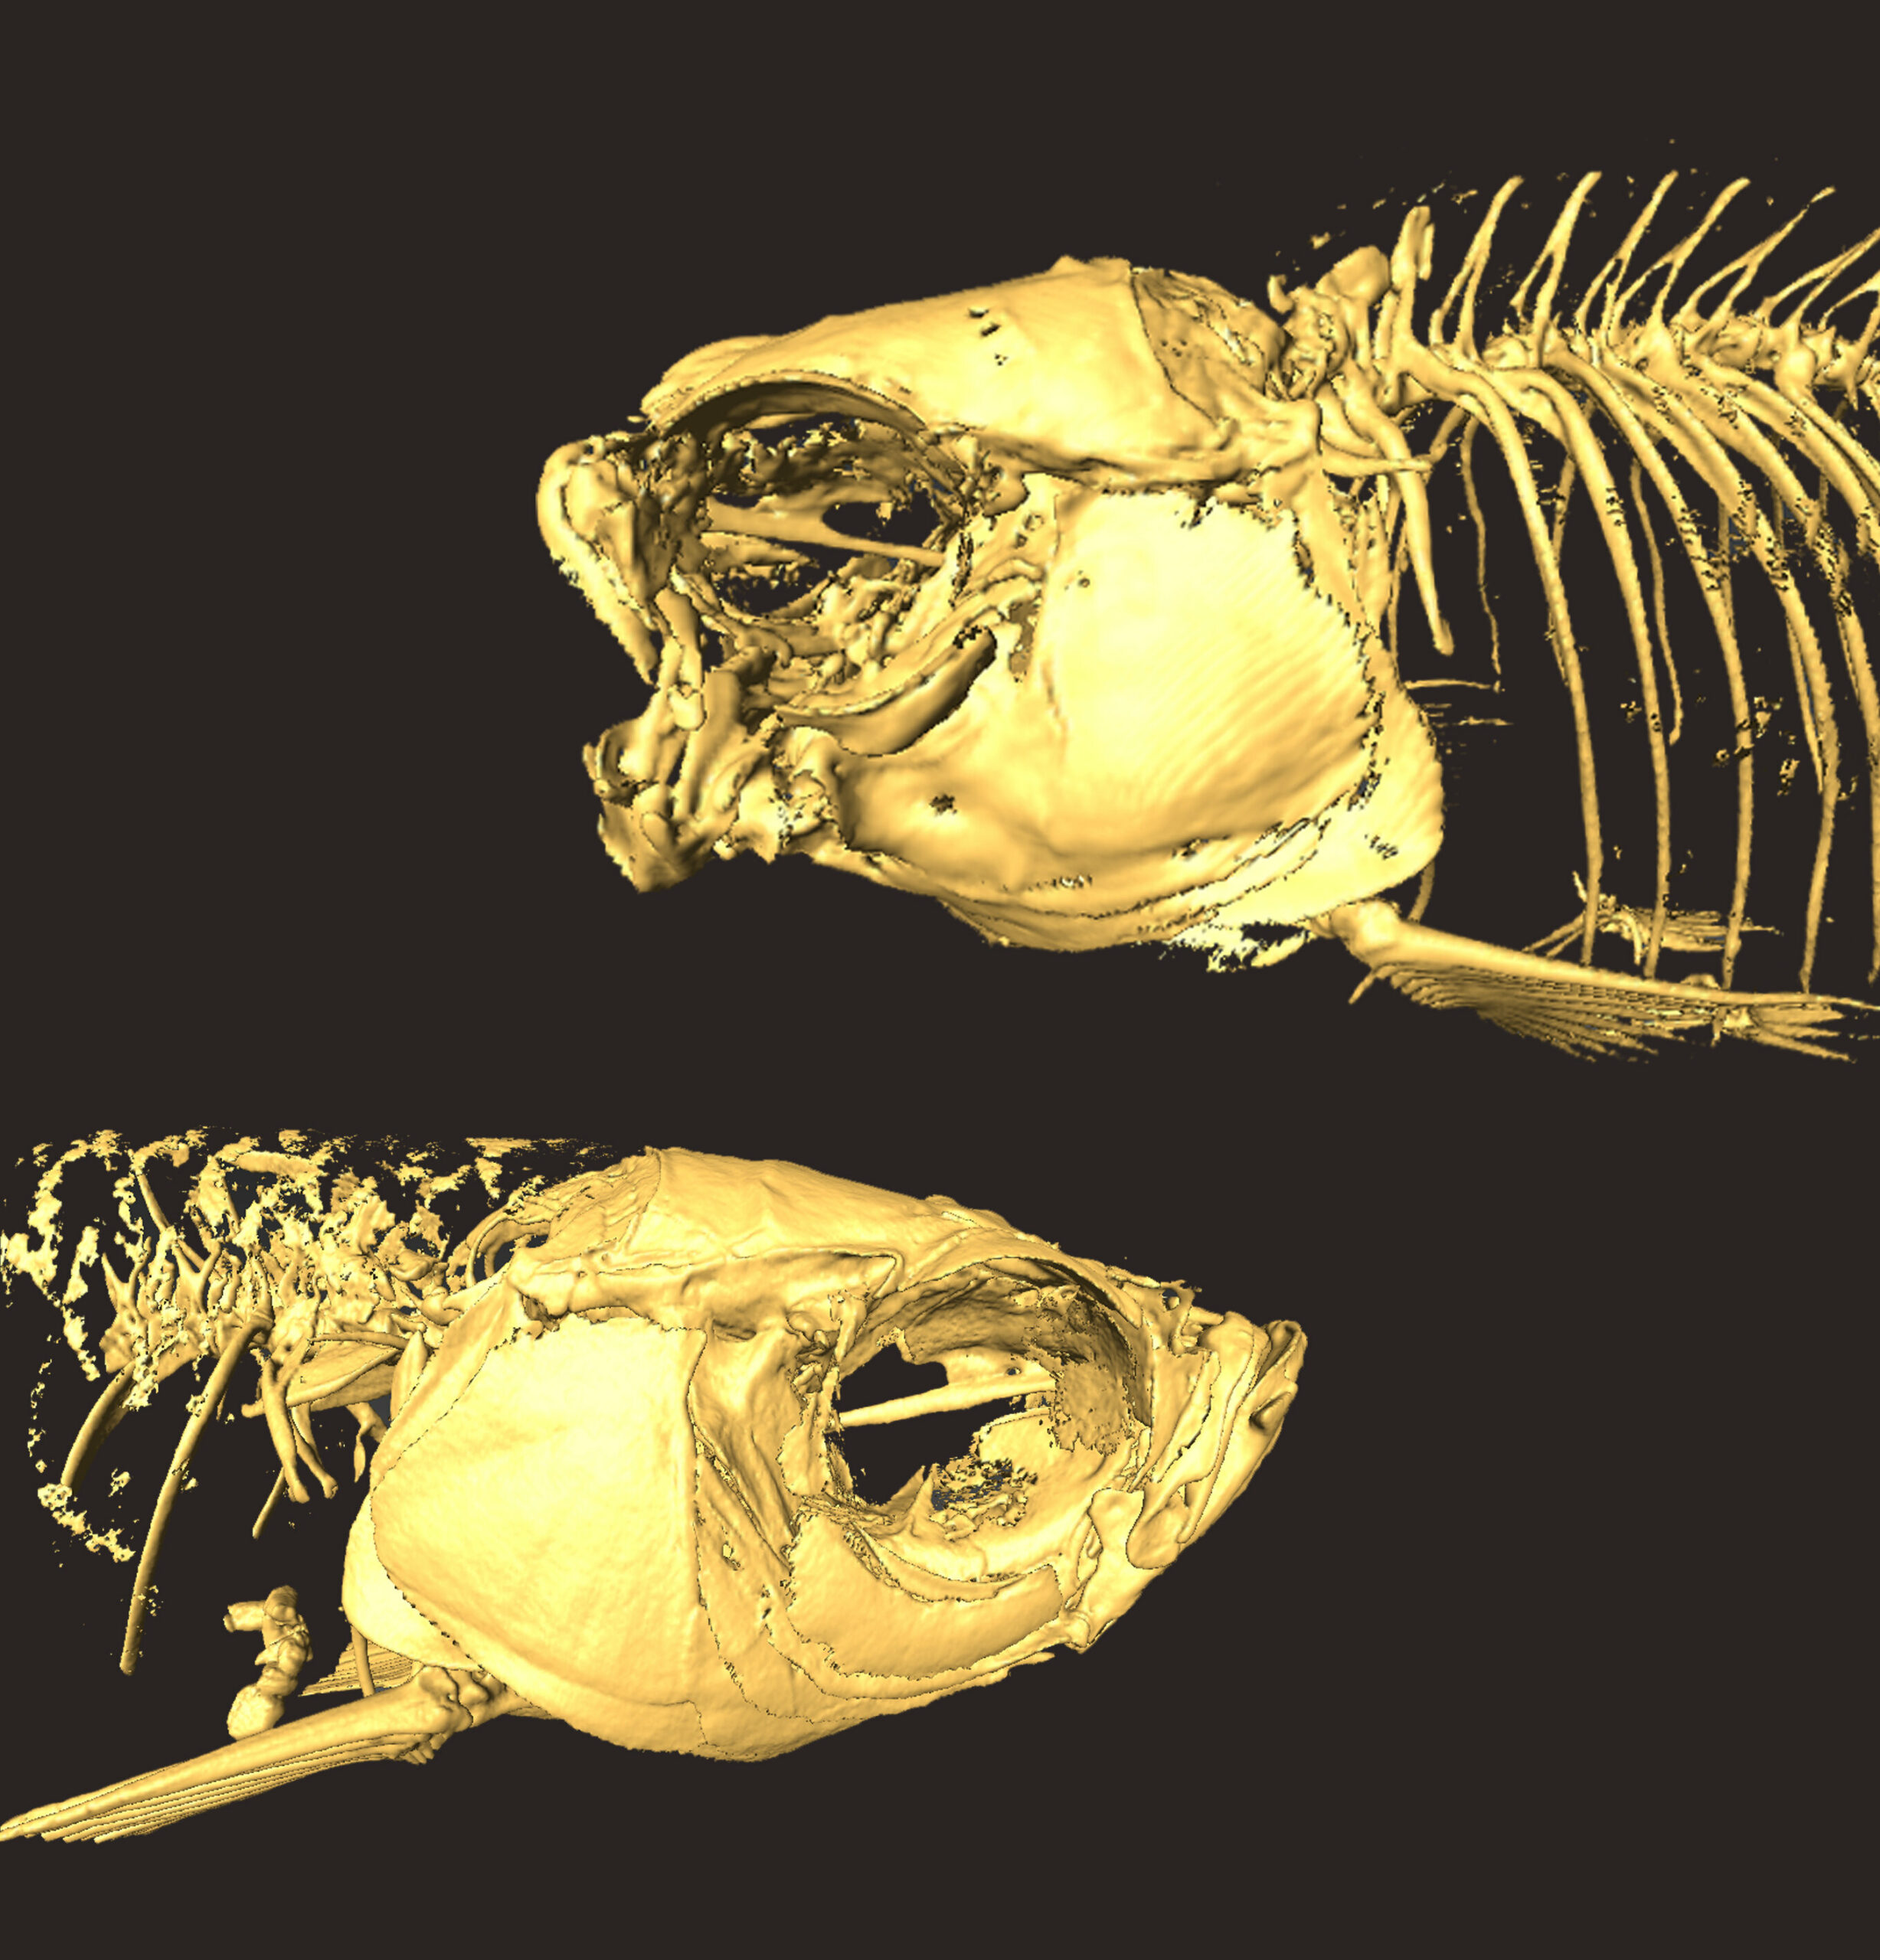 Modern mutant fishes replicate creatures of ancient oceans